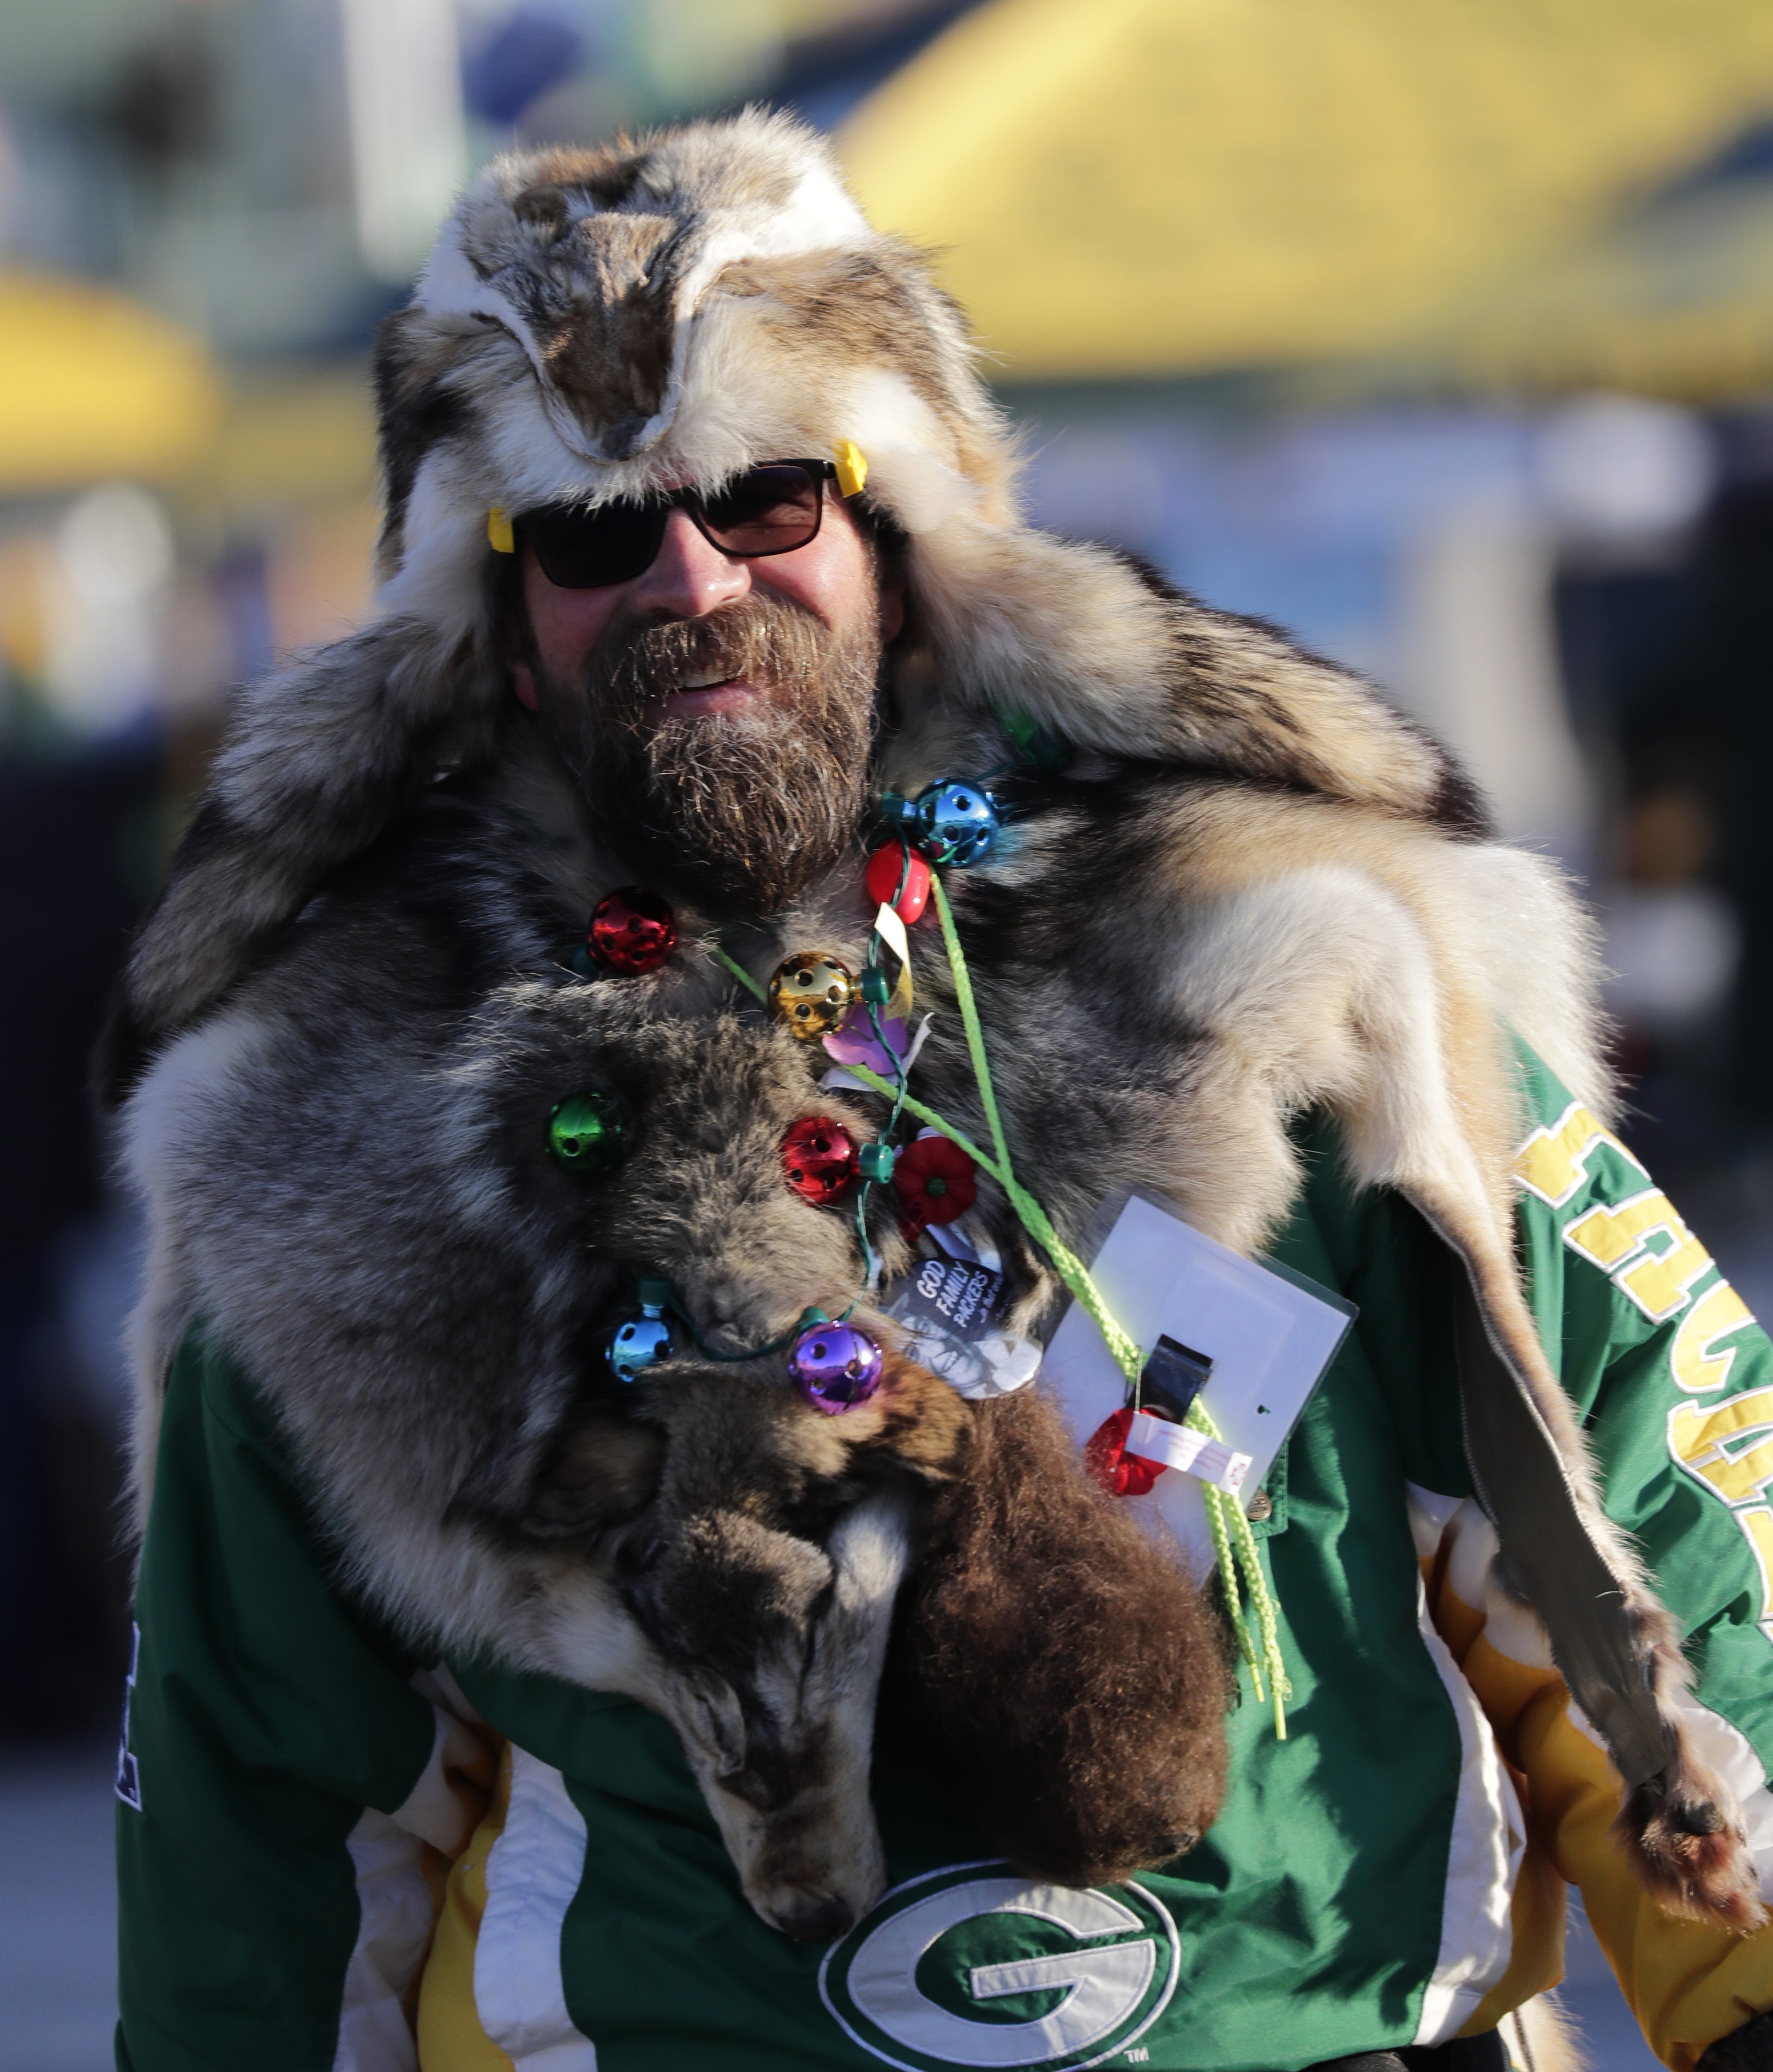 Dan Stroobants of Chilton is ready for the cold as he tailgates before the Green Bay Packers take on the Chicago Bears Sunday, December 15, 2019, at Lambeau Field in Green Bay, Wis.